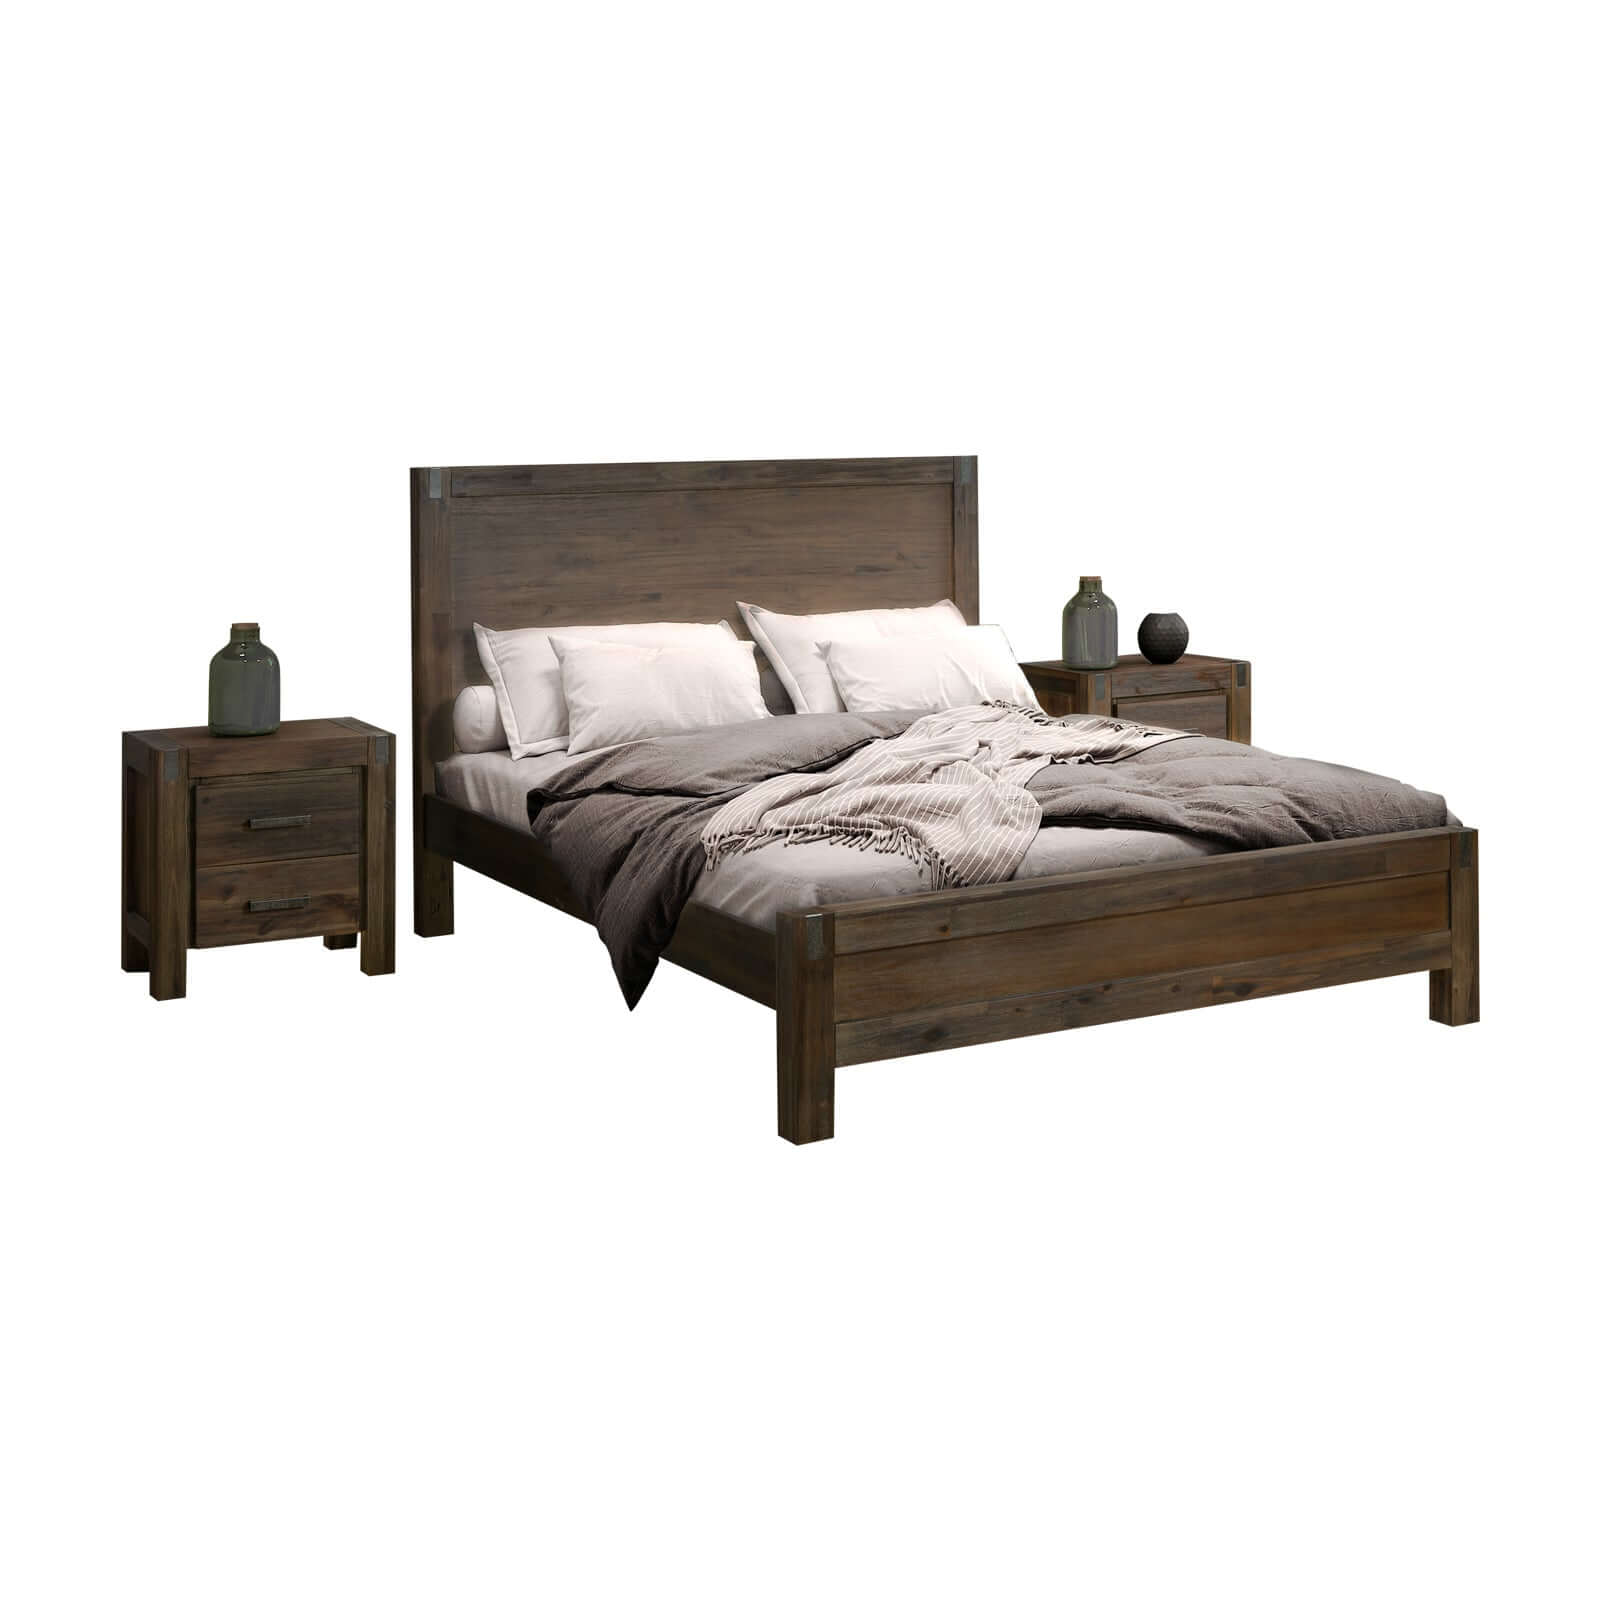 Solid Wood King Size Chocolate Bedroom Suite with Bed and Bedside Table-Upinteriors